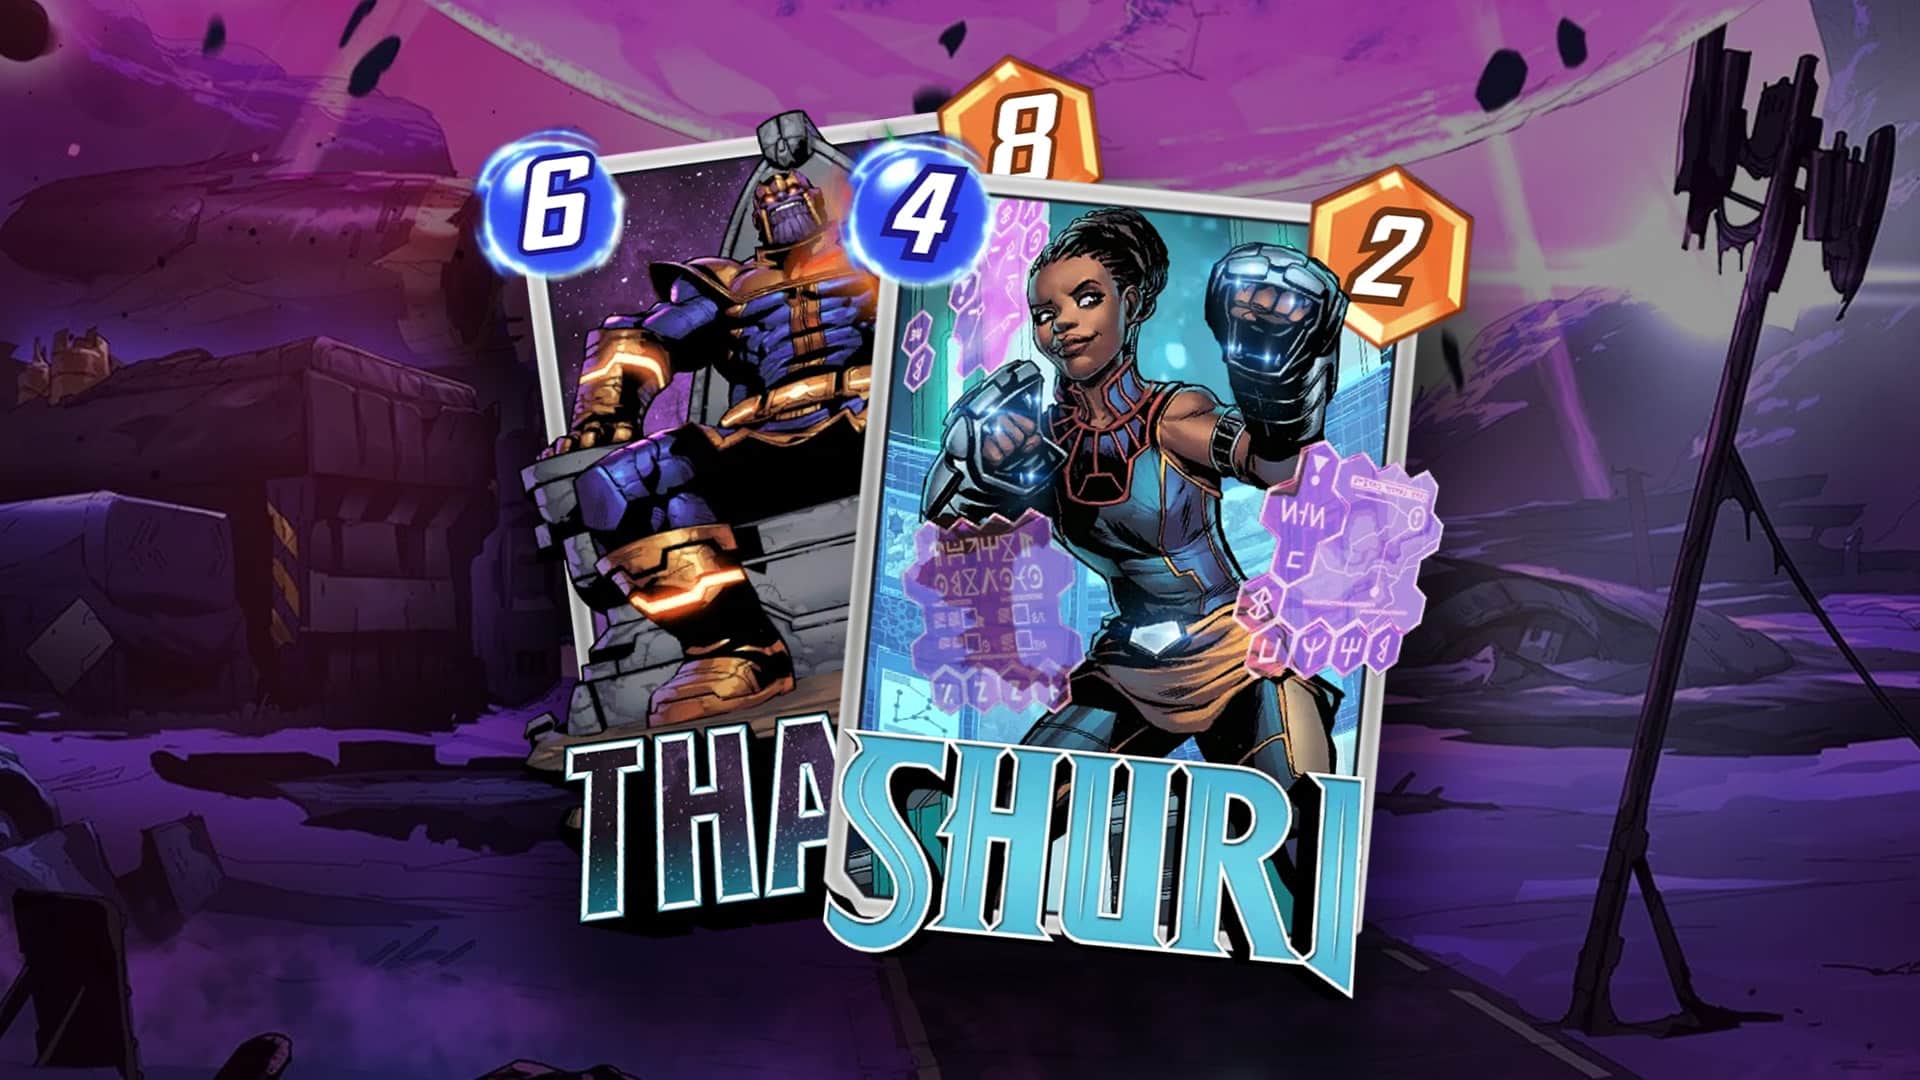 This Pool 3 Deck took me to Infinite against Shuri/Thanos! : r/MarvelSnap